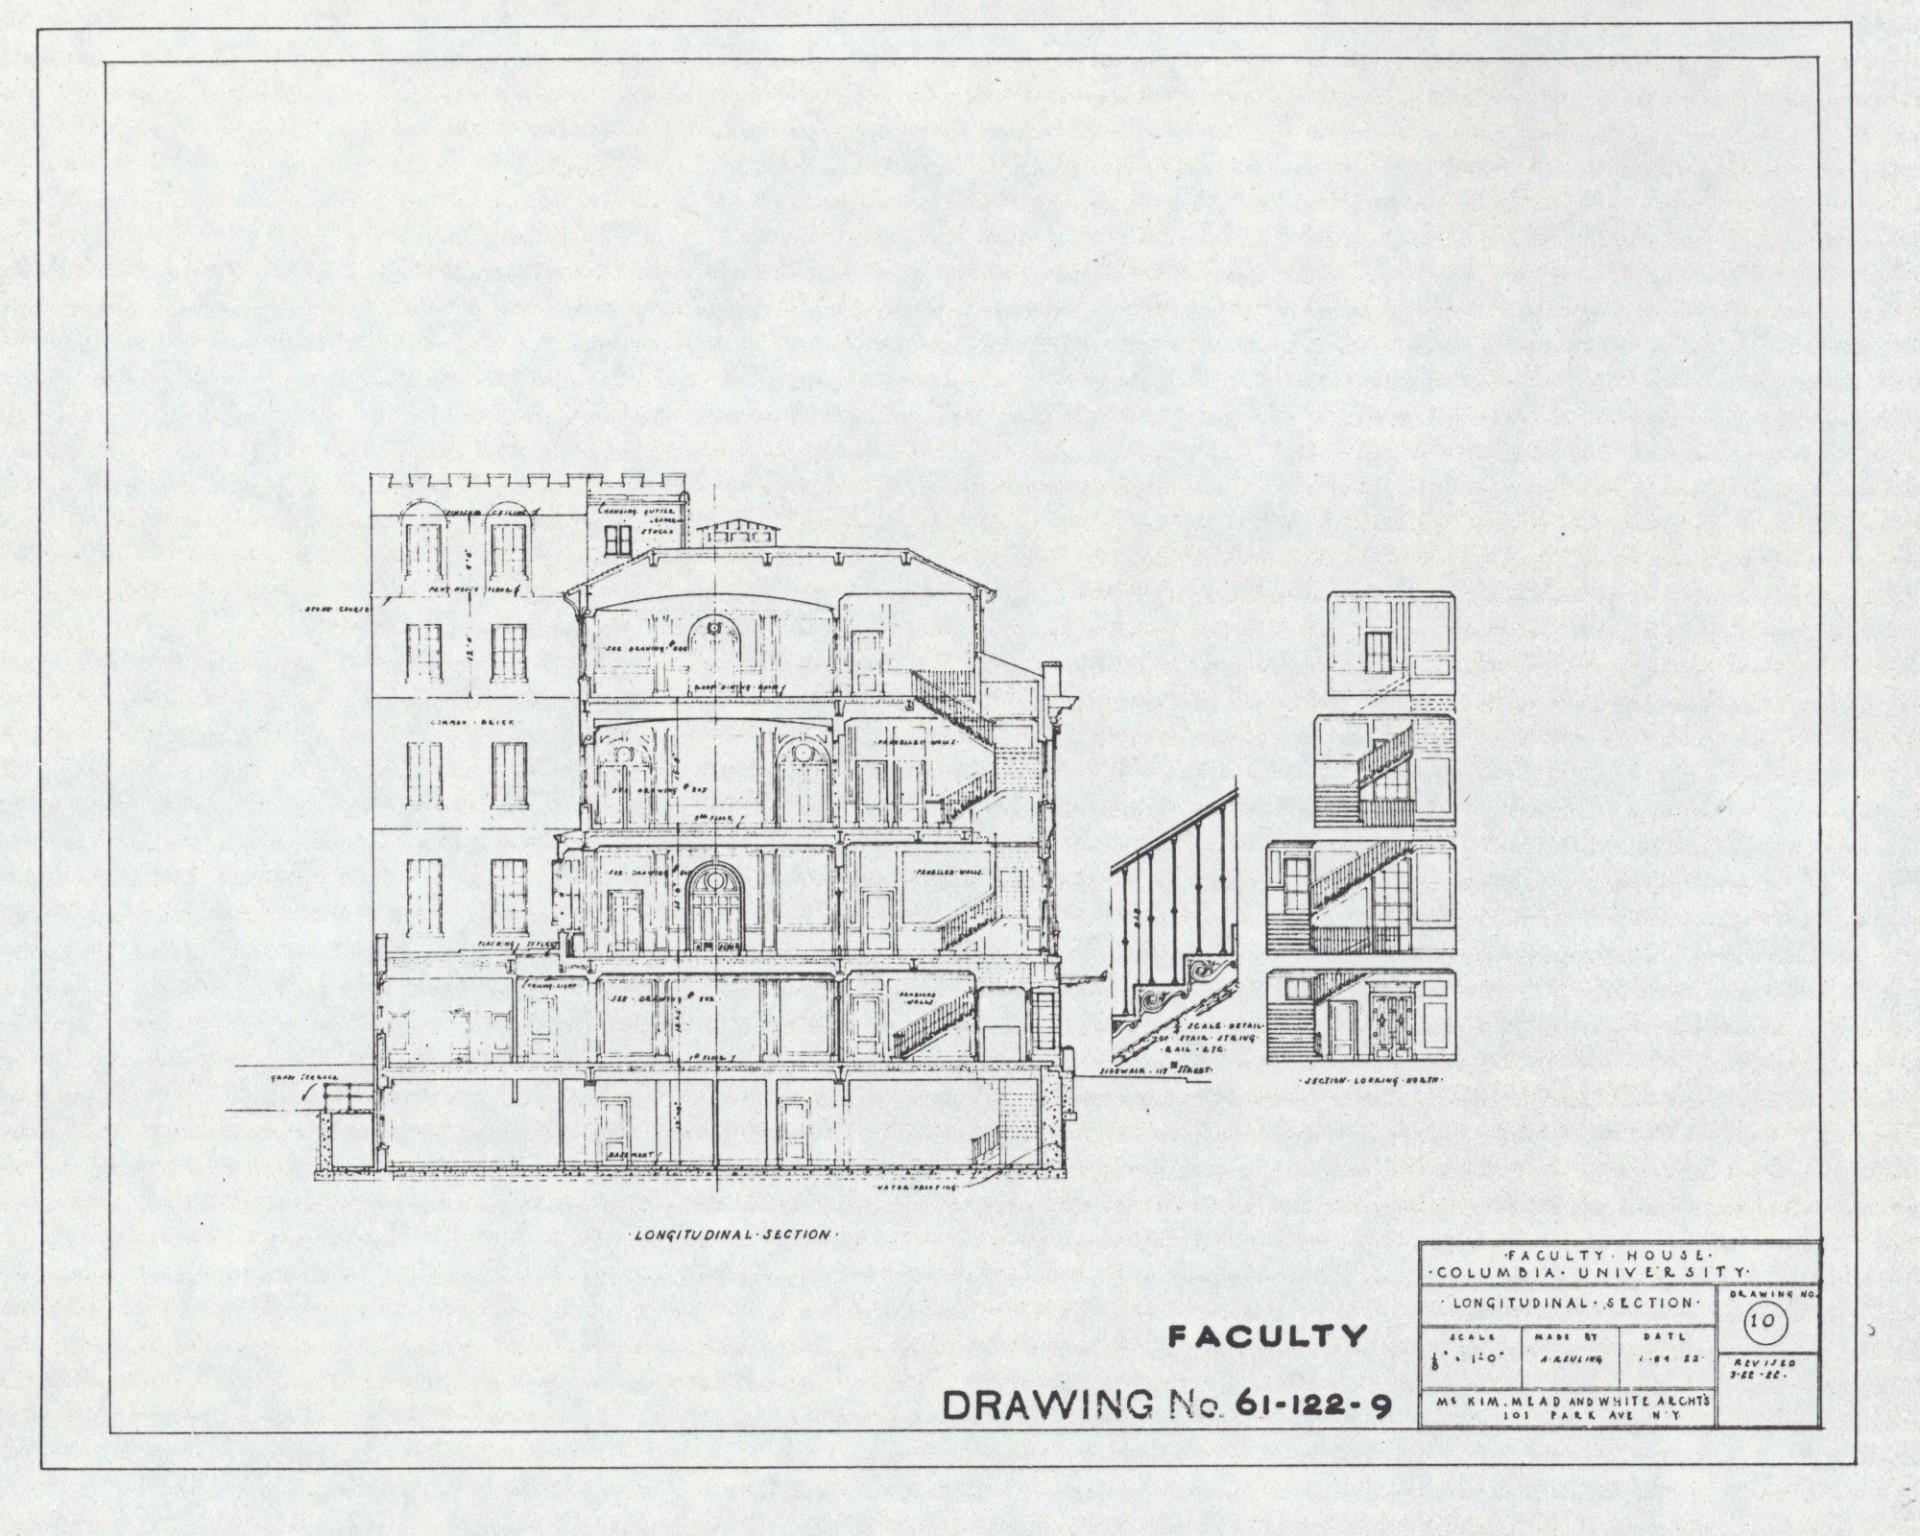 Historical architectural drawing of the building